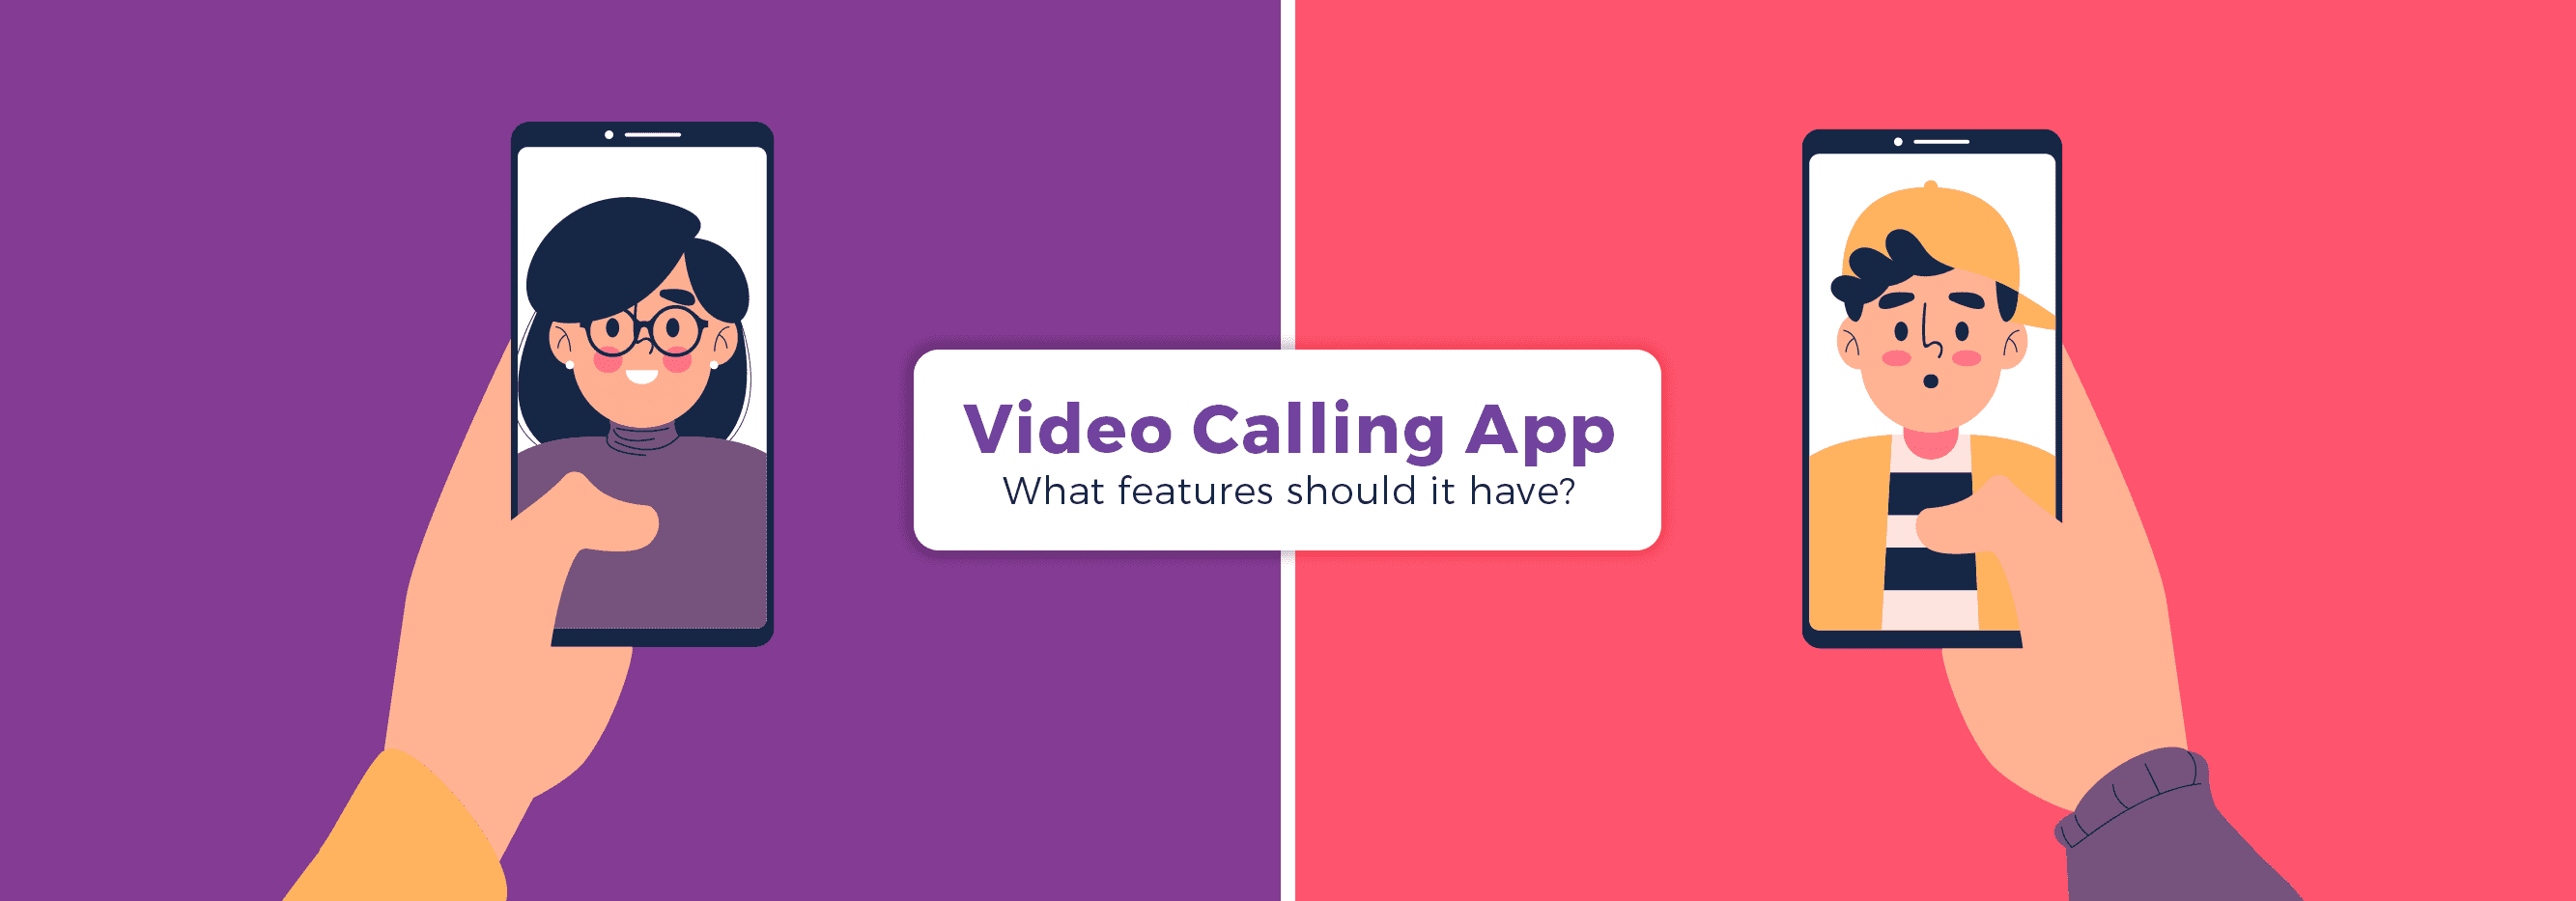 Video Calling App- What features should it have_banner